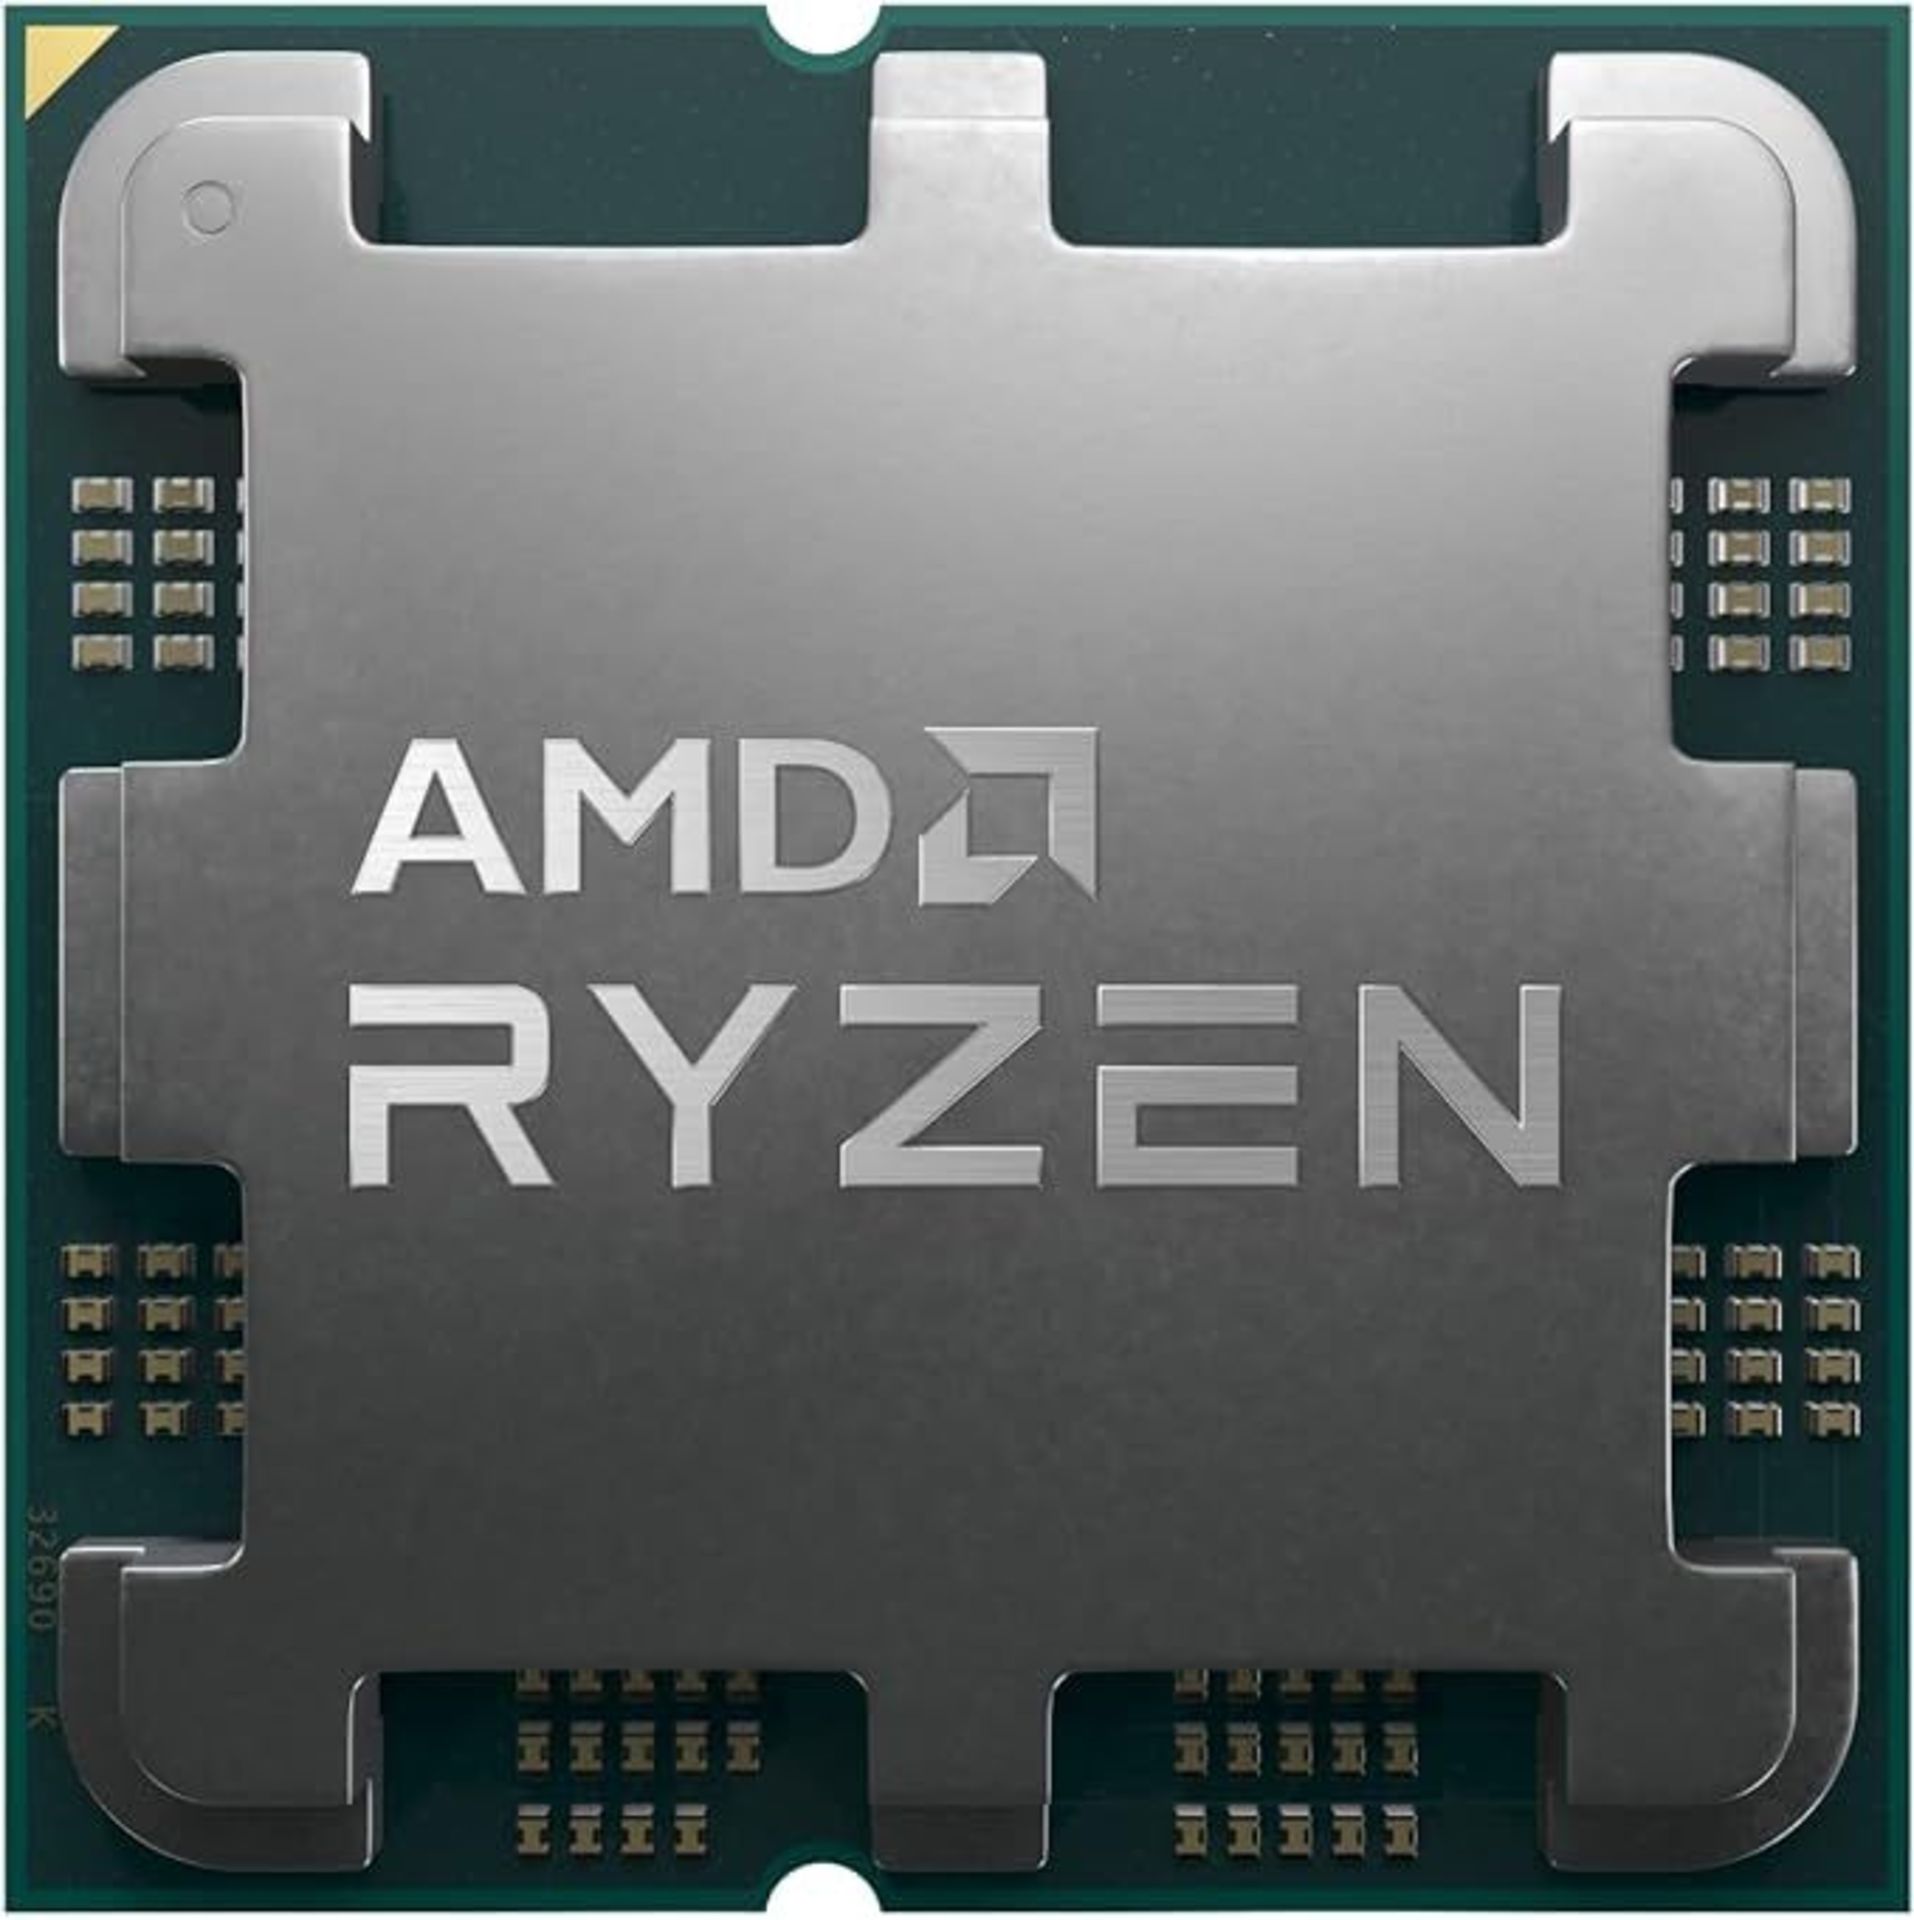 AMD Ryzen™ 7 7700X Desktop Processor (8-core/16-thread, 40MB cache, up to 5.4 GHz max boost). - - Image 2 of 2